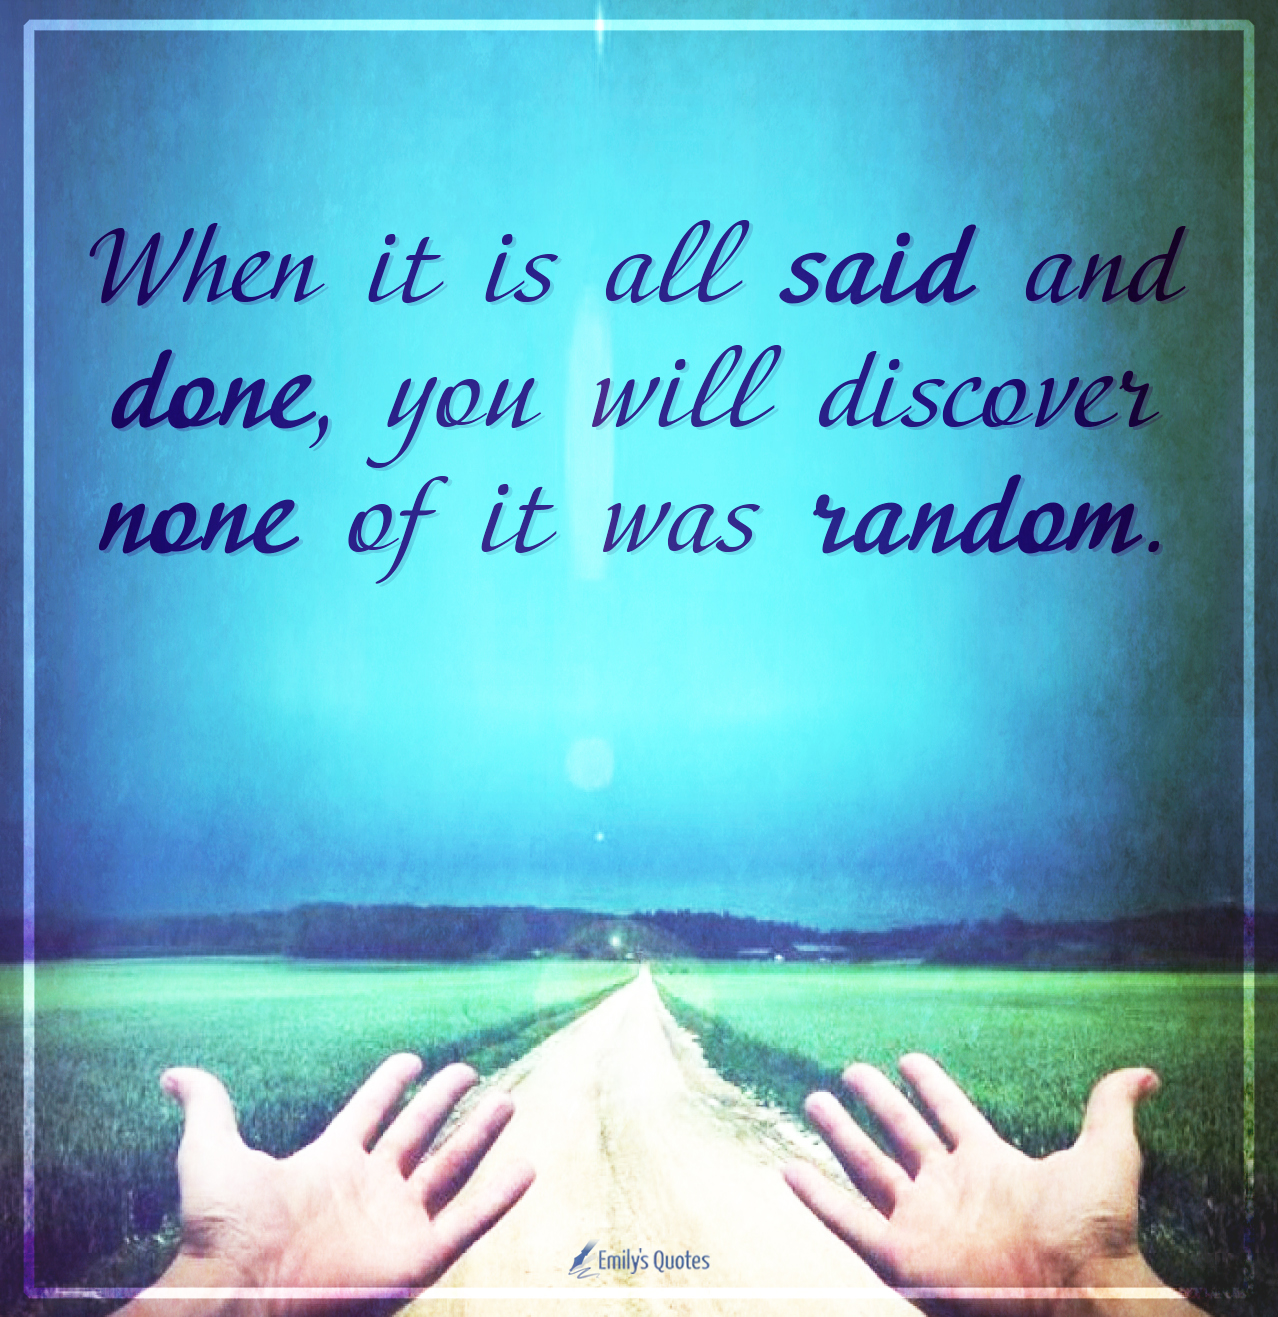 When it is all said and done, you will discover none of it was random